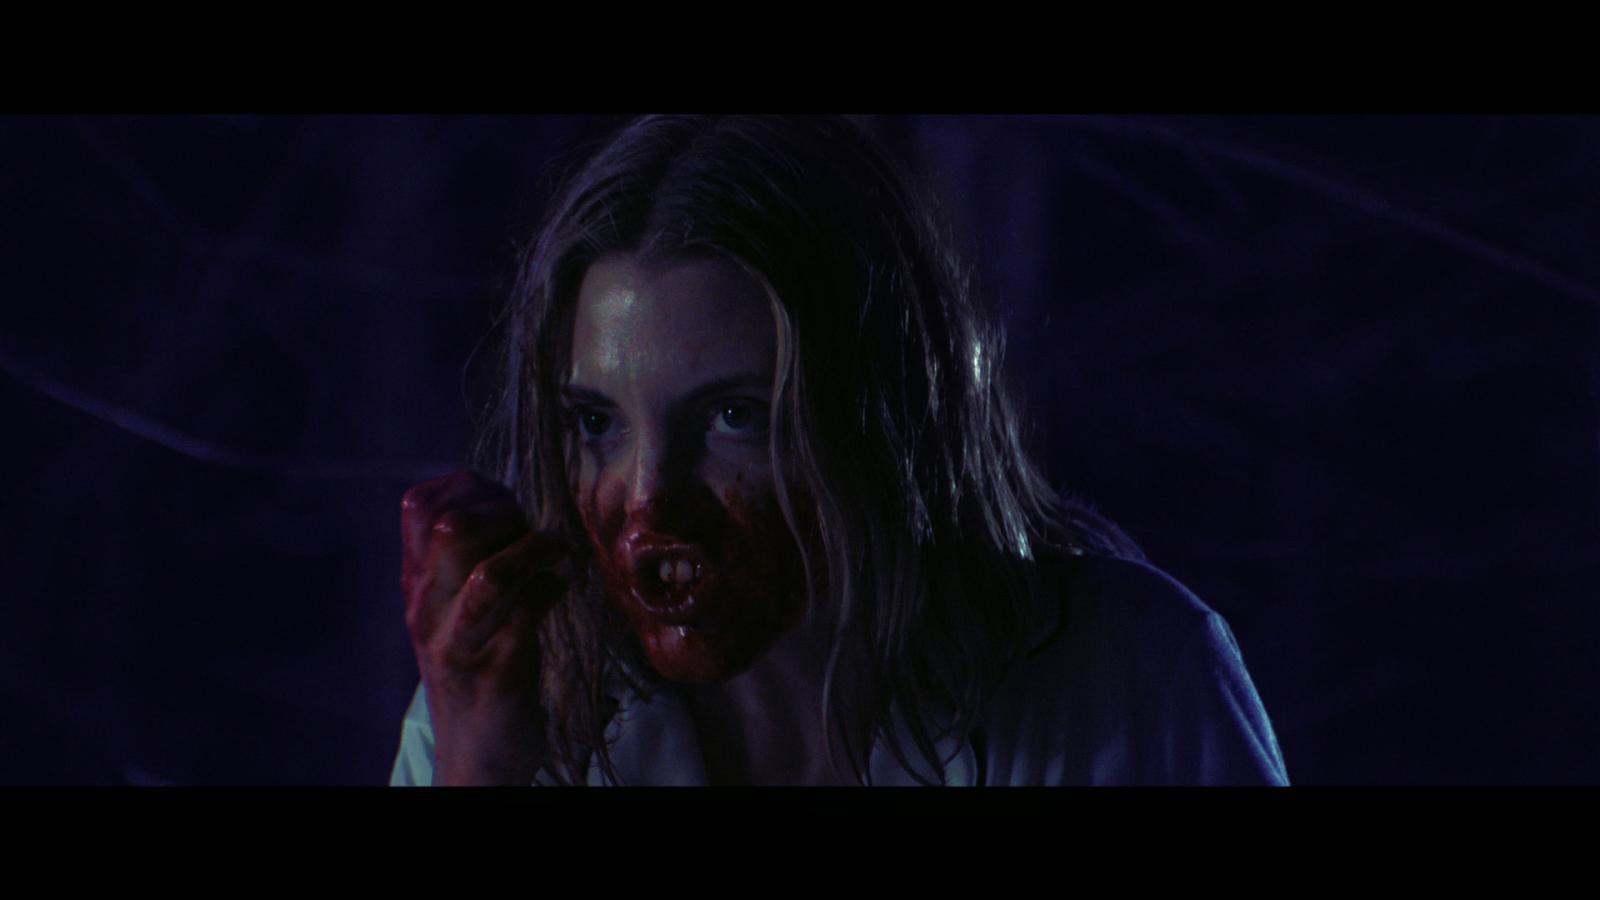 Bloodthirsty - Sete di Sangue - Limited Edition Blu-ray + Booklet (Blu-ray) Thumbnail 2